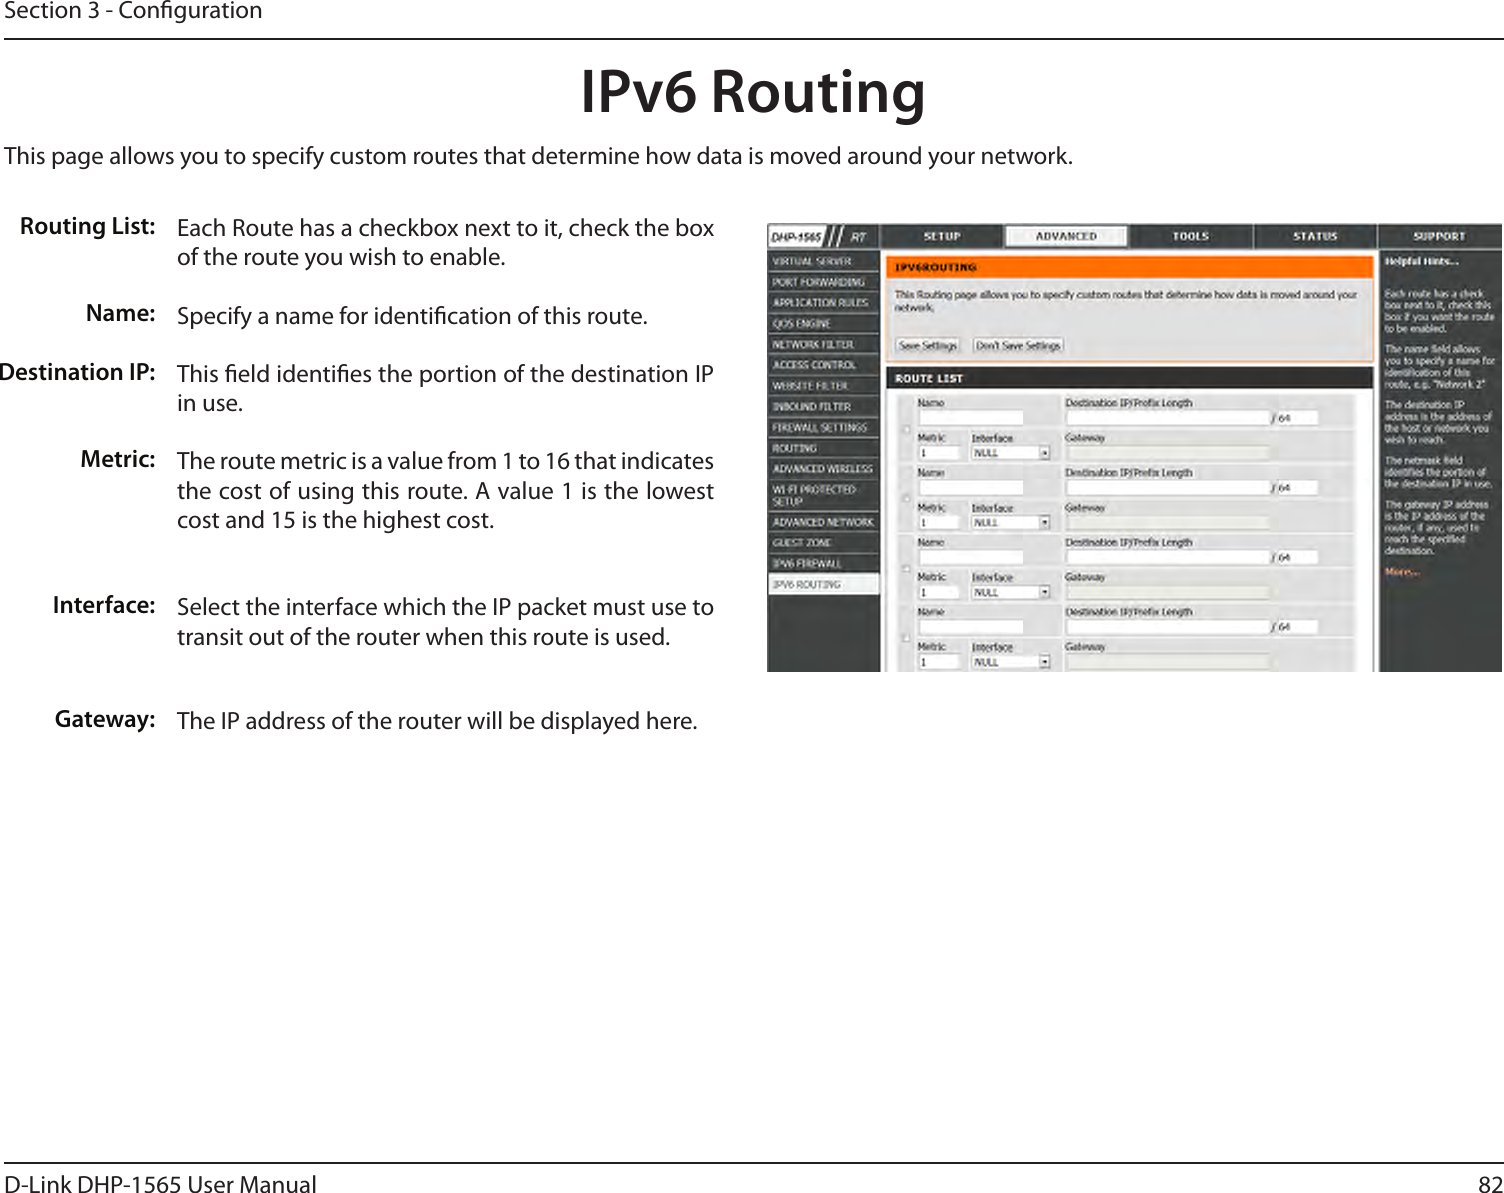 82D-Link DHP-1565 User ManualSection 3 - CongurationIPv6 Routing This page allows you to specify custom routes that determine how data is moved around your network. Routing List:Name:Destination IP:Metric:Interface:Gateway:Each Route has a checkbox next to it, check the box of the route you wish to enable. Specify a name for identication of this route.This eld identies the portion of the destination IP in use. The route metric is a value from 1 to 16 that indicates the cost of using this route. A value 1 is the lowest cost and 15 is the highest cost.Select the interface which the IP packet must use to transit out of the router when this route is used.The IP address of the router will be displayed here. 